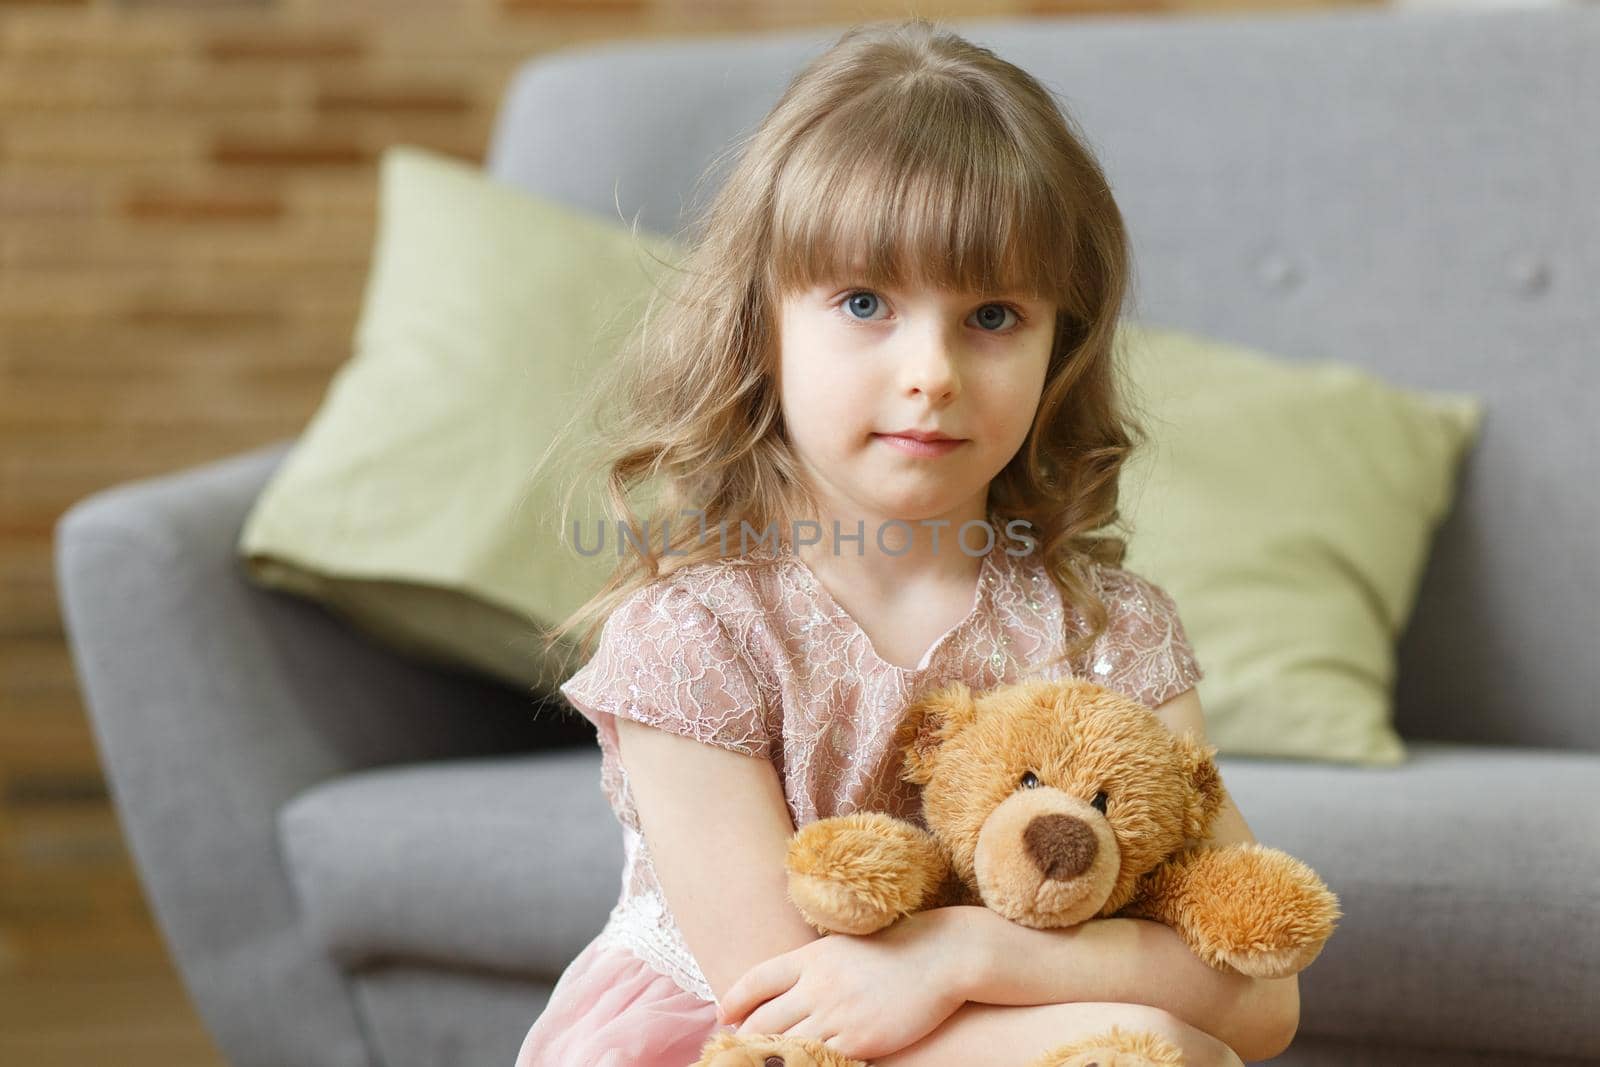 Adorable little girl with teddy bear looking at camera at home, smiling preschool pretty child with beautiful happy face posing alone on sofa, cute positive cheerful kid headshot portrait